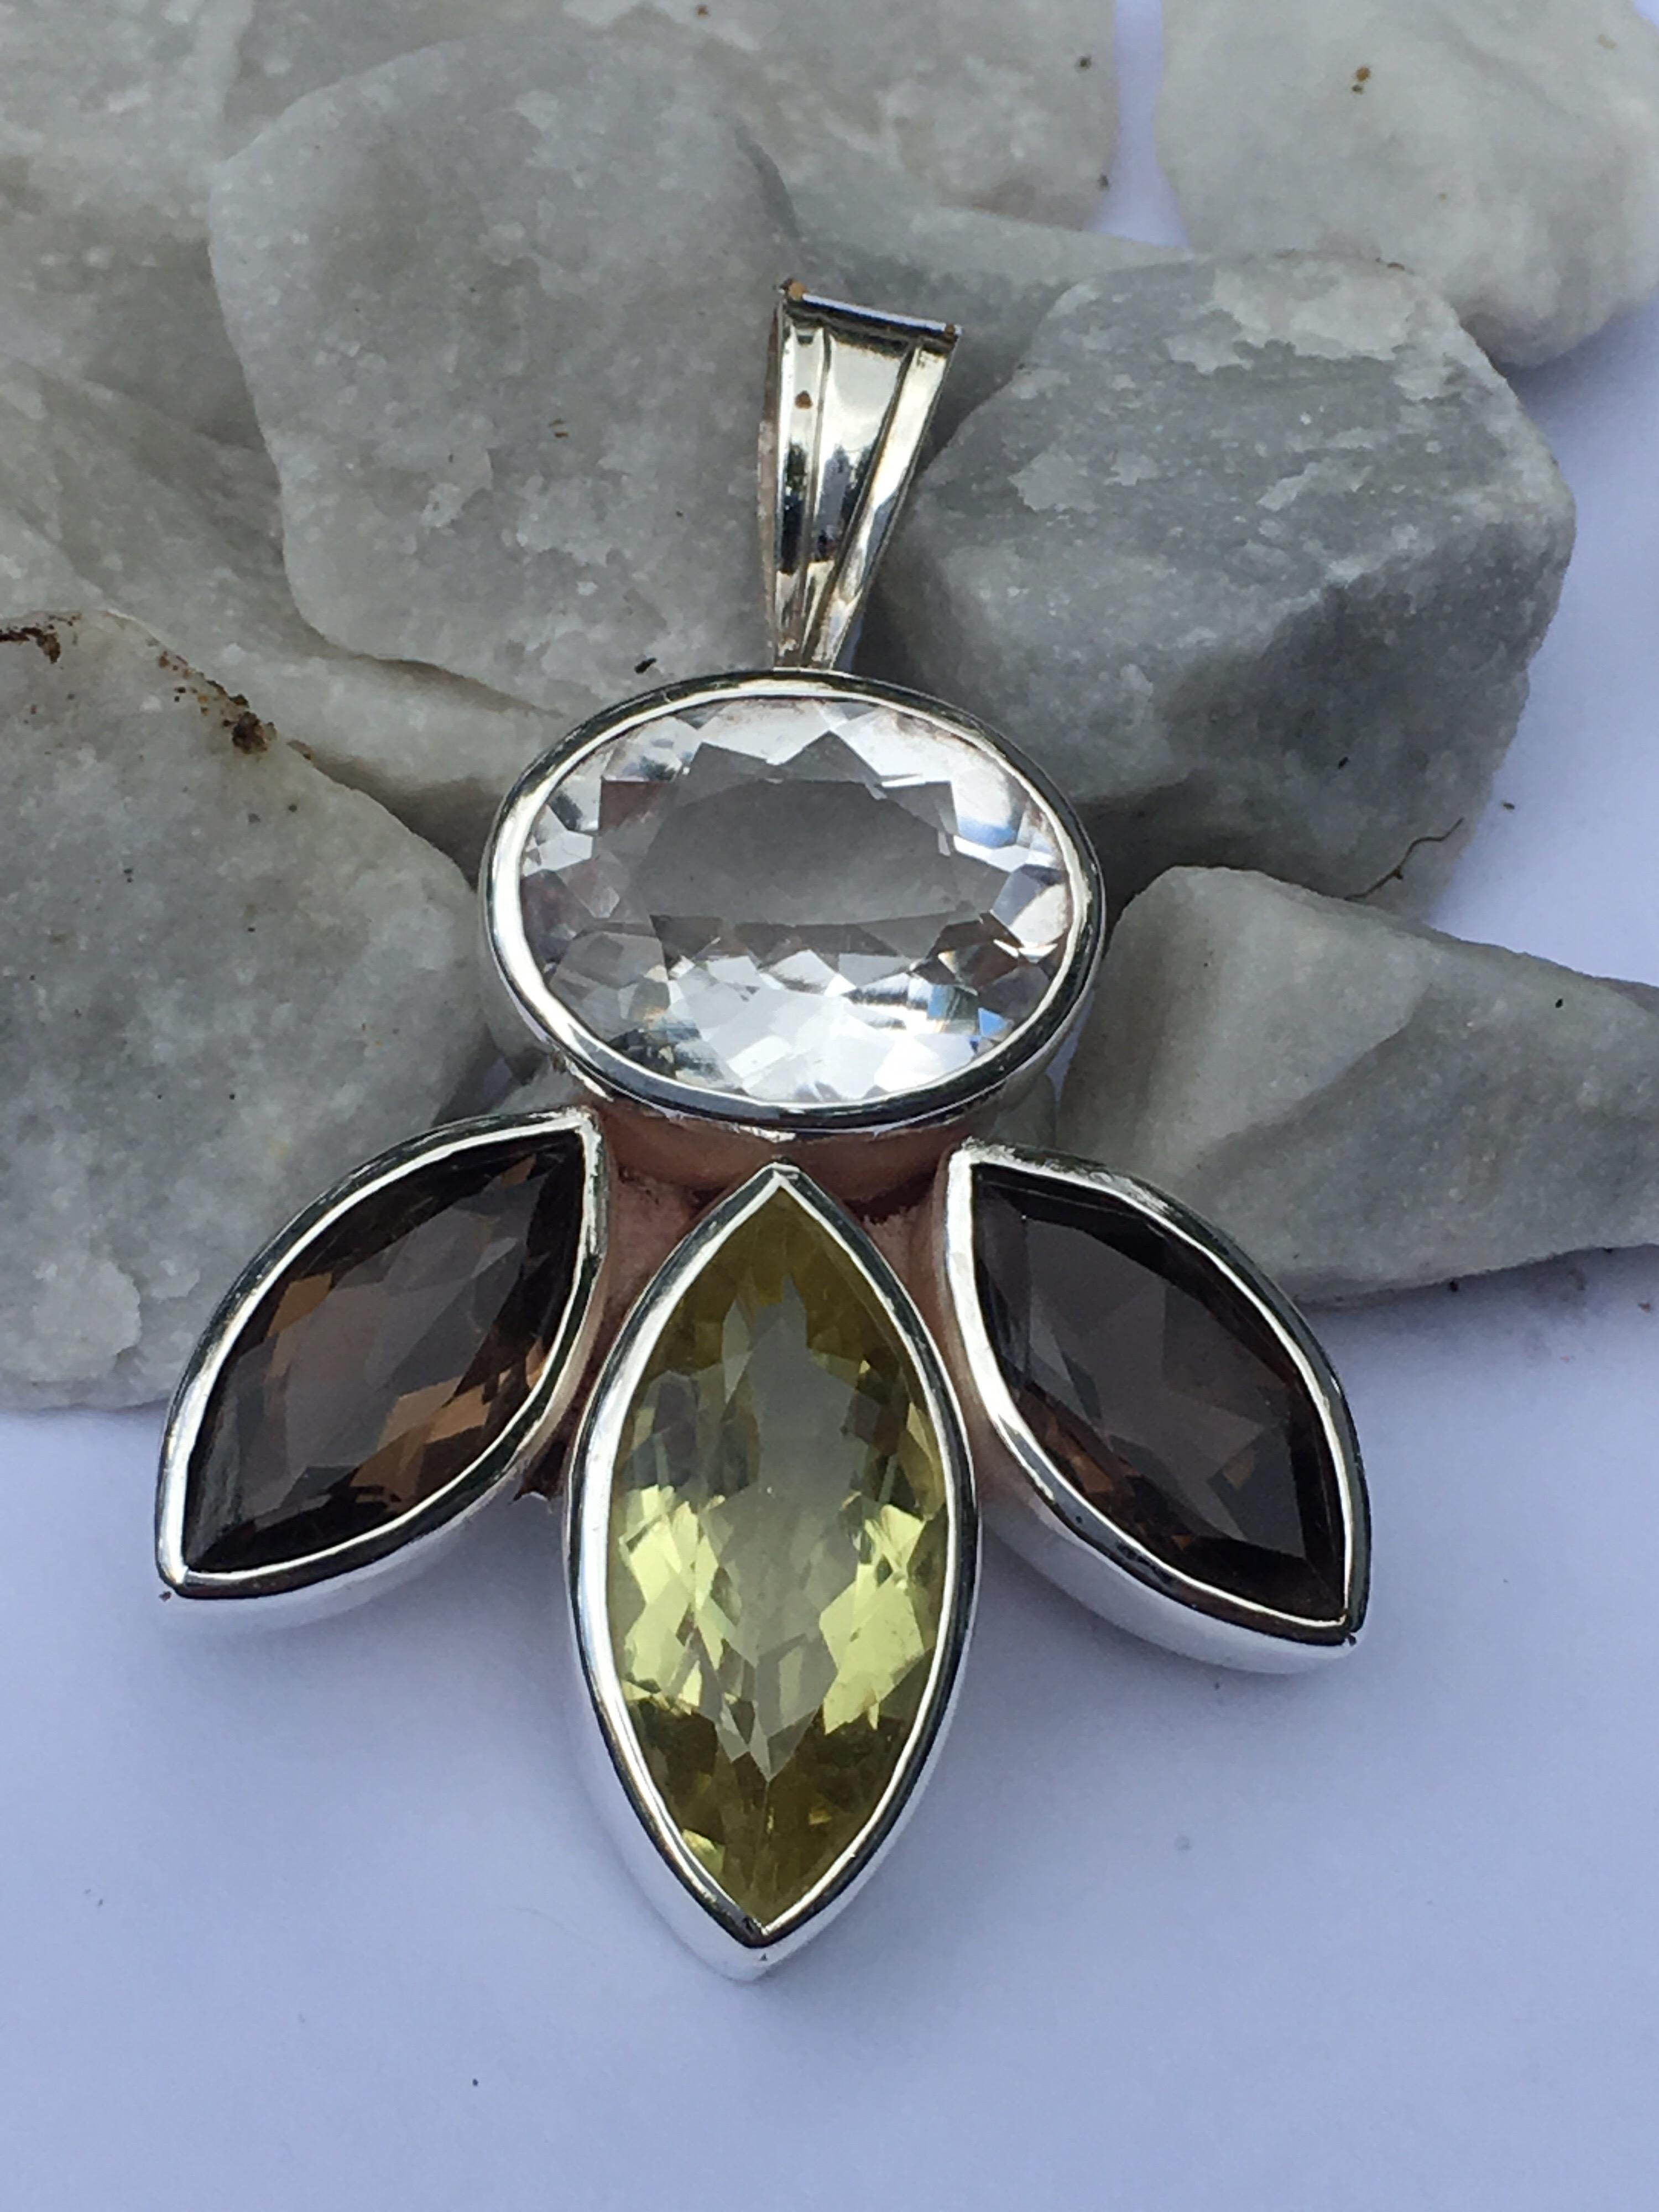 Marquise Lemon Quartz 10 MM X 20 MM, Smokey Quartz 8 MM X 16 MM and Oval Crystal 12 MM X 16 MM .
Hand cut and polished stone and one of a kind hand  crafted pendant.
Pendant measures 34 MM .
Total pendant is 17.81 Gram.
One can wear this pendant